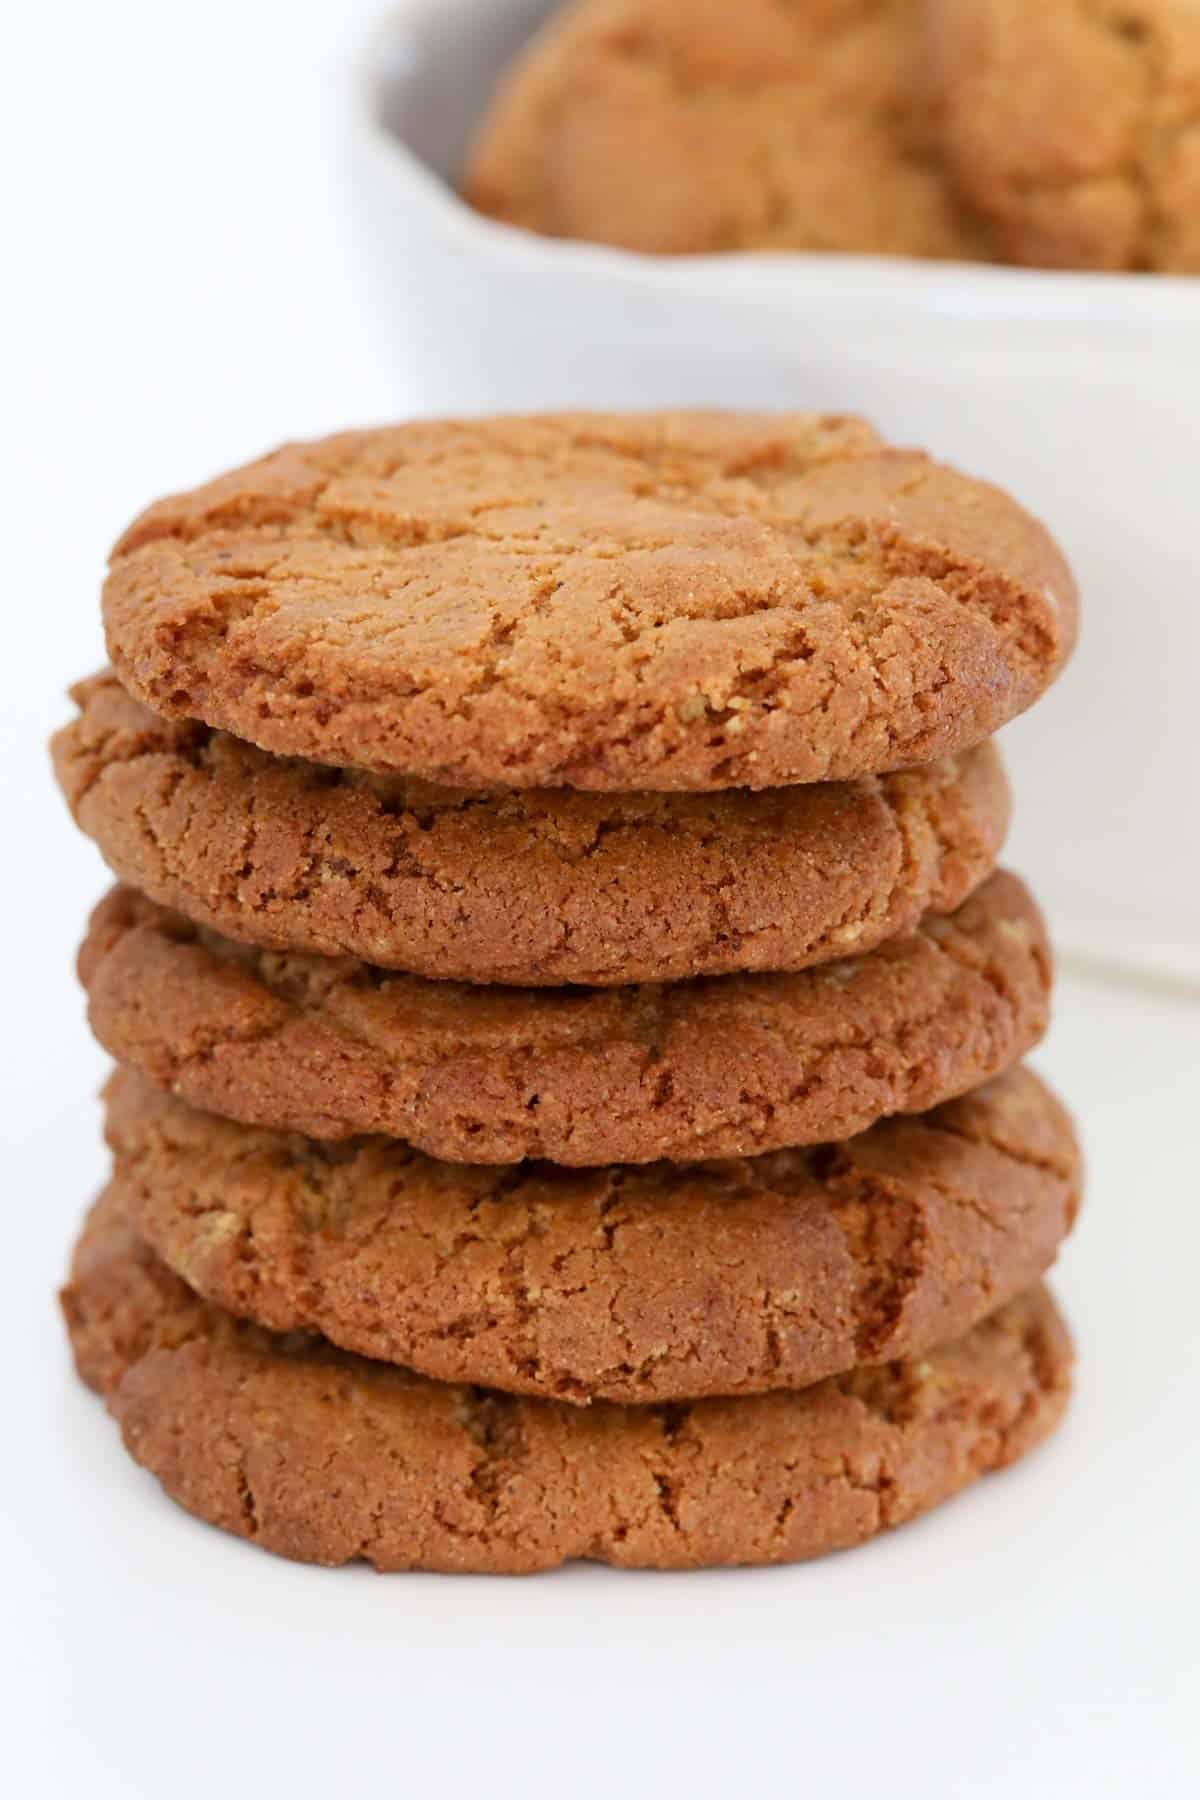 A stack of Ginger Nut biscuits.